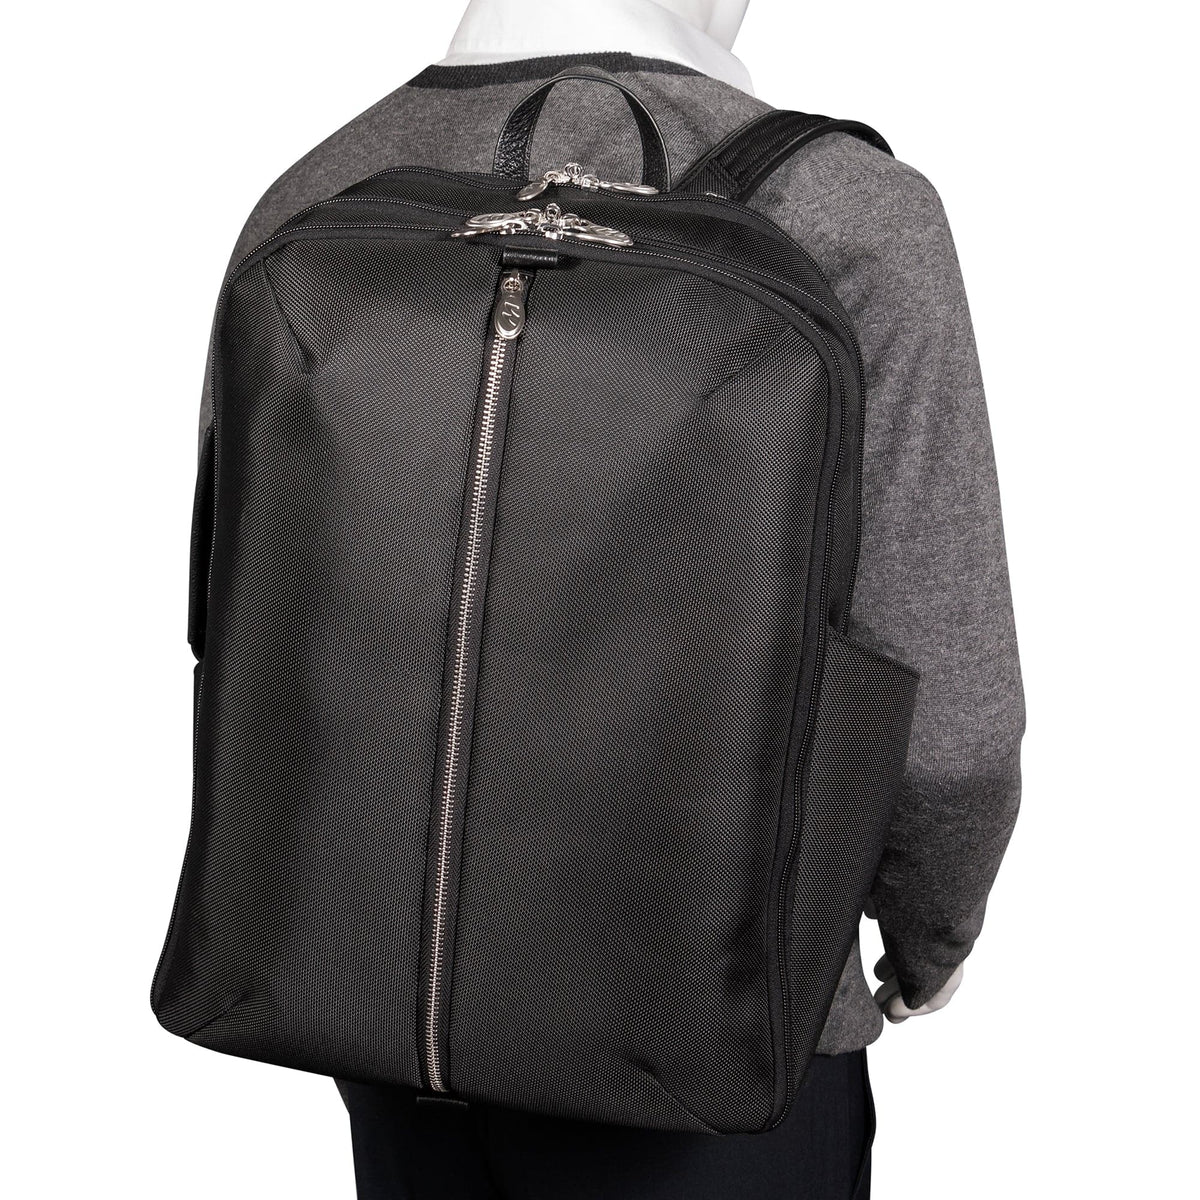 McKlein U Series Englewood 17" Triple Compartment Carry-All Laptop and Tablet Weekend Nylon Backpack